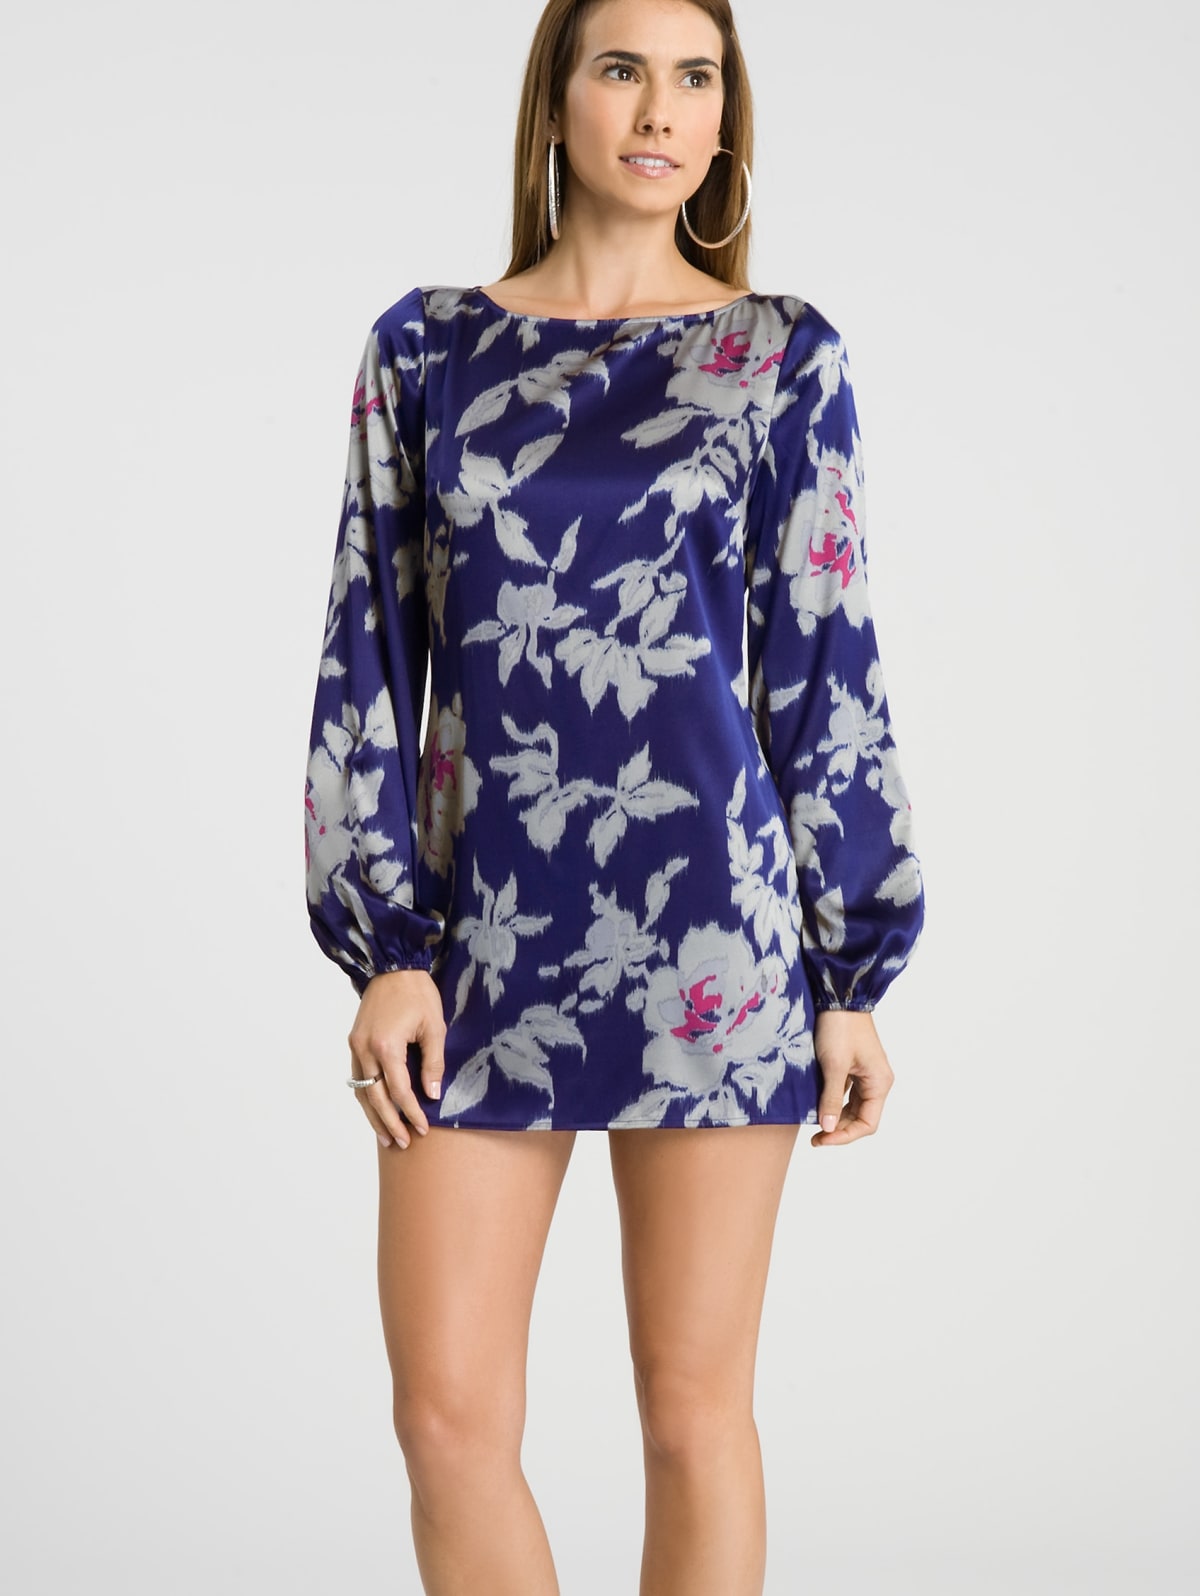 marciano floral dress